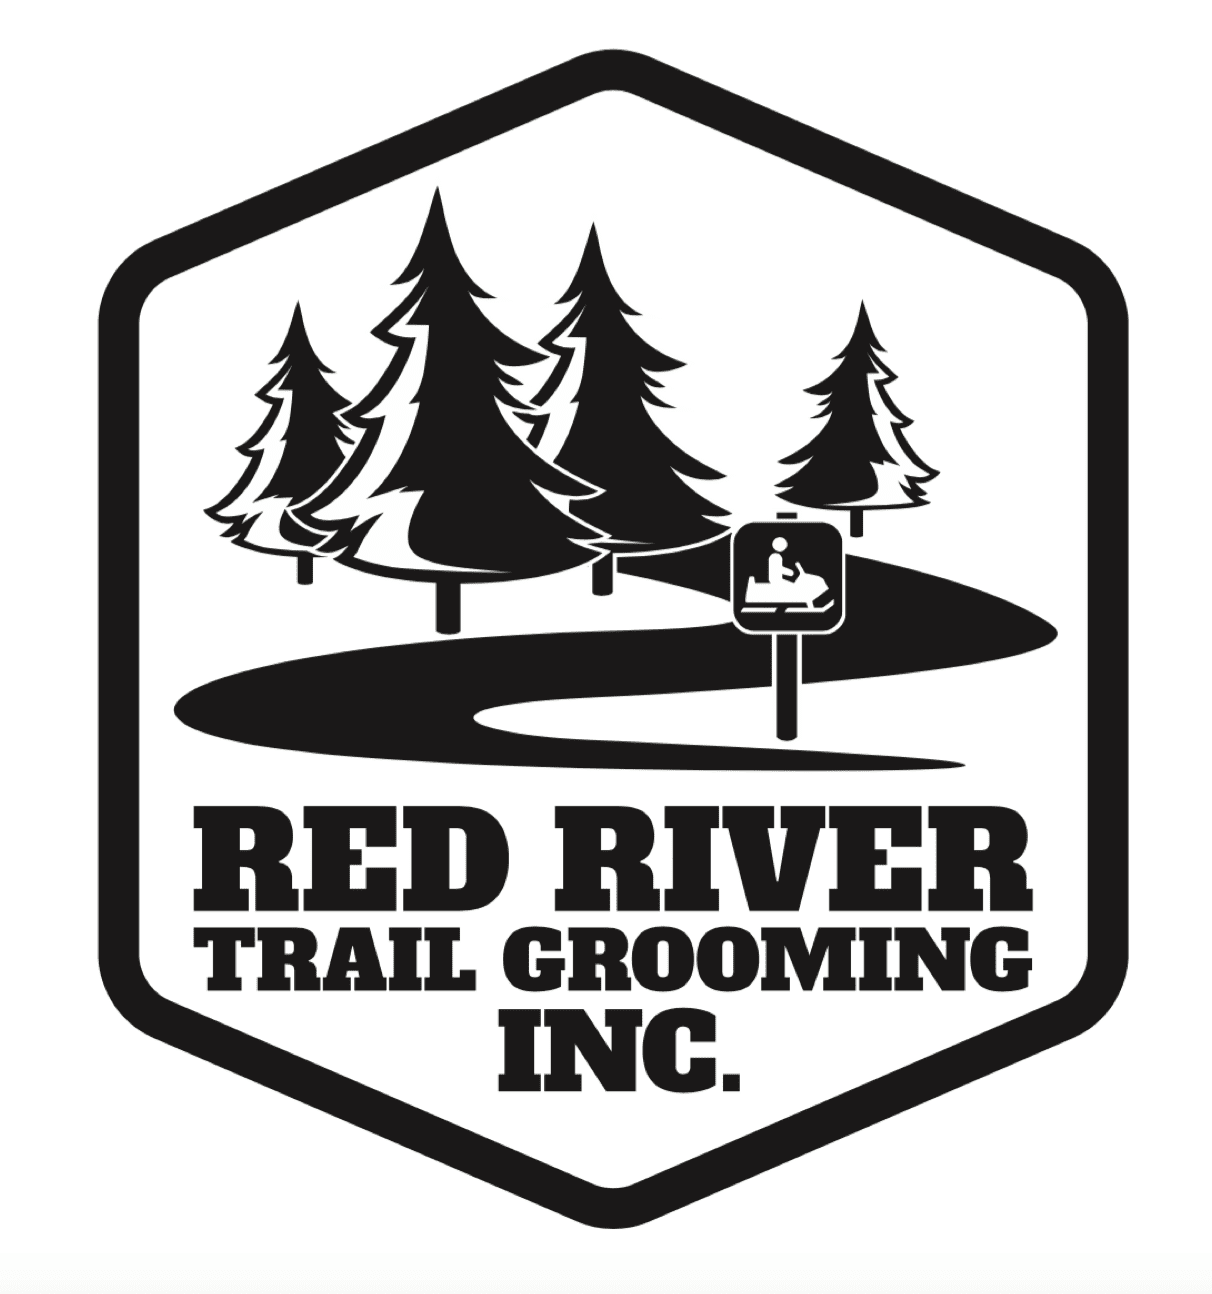 Red River Trail Grooming Inc